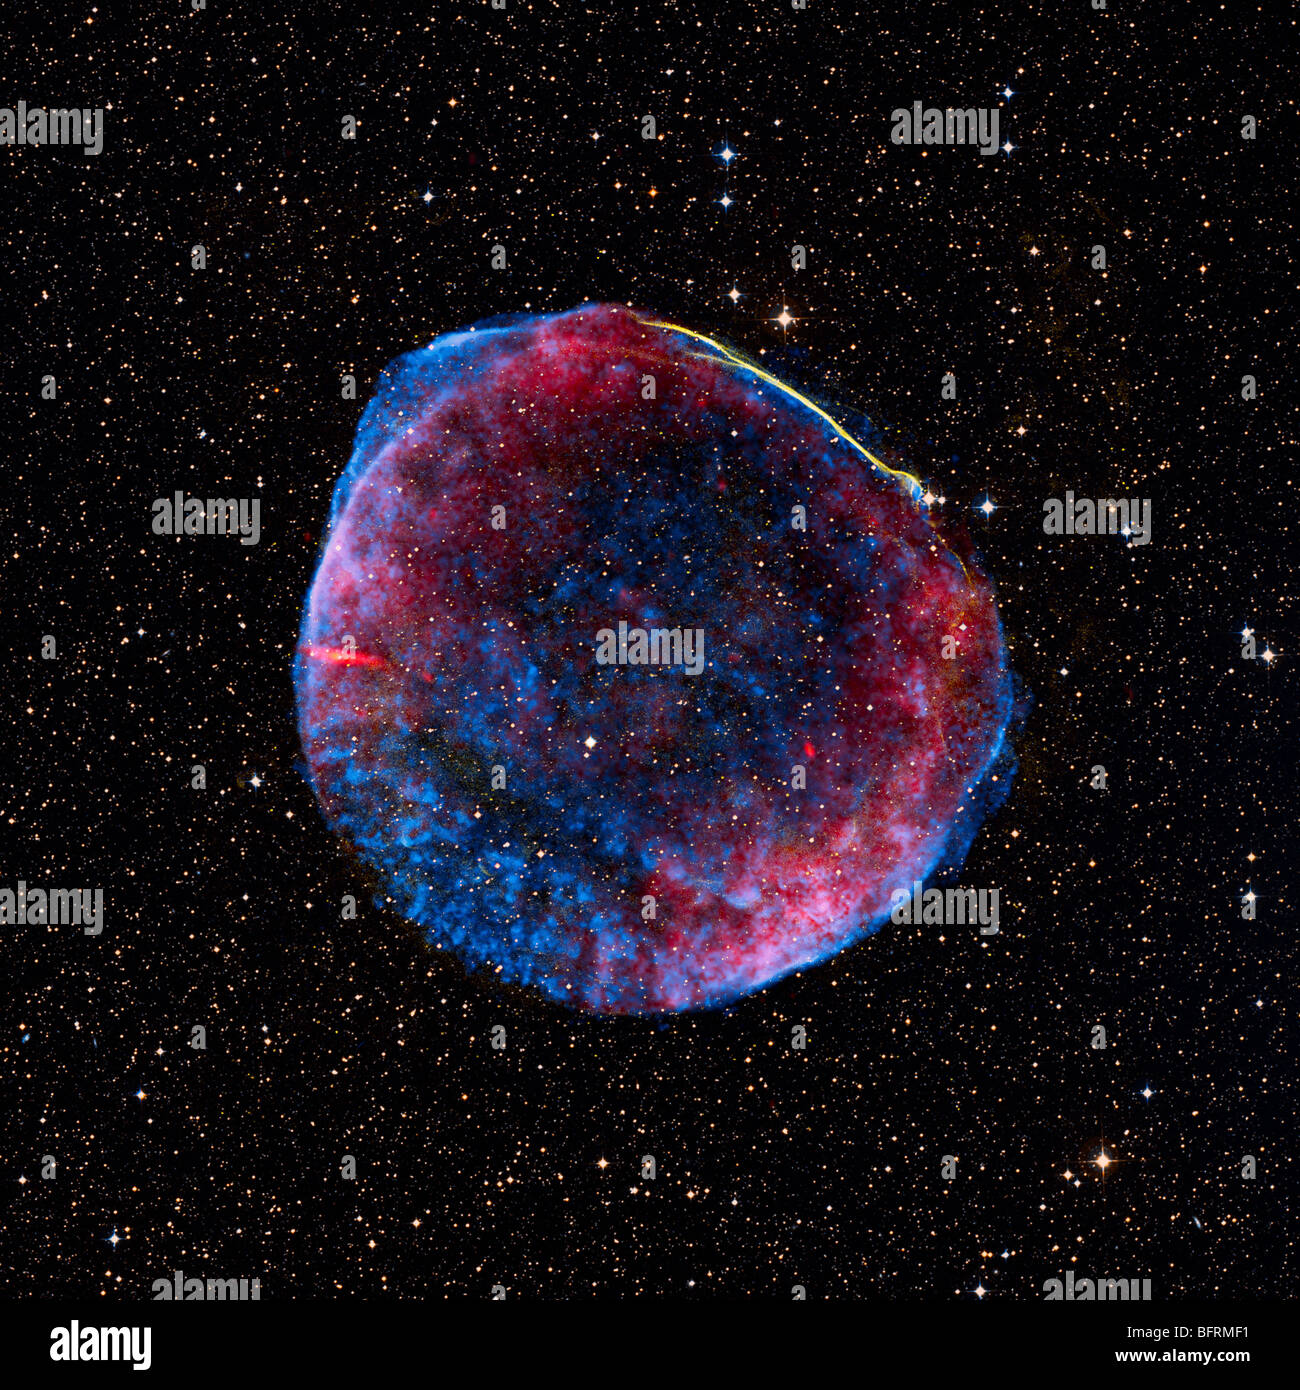 A composite image of the SN 1006 supernova remnant. Stock Photo